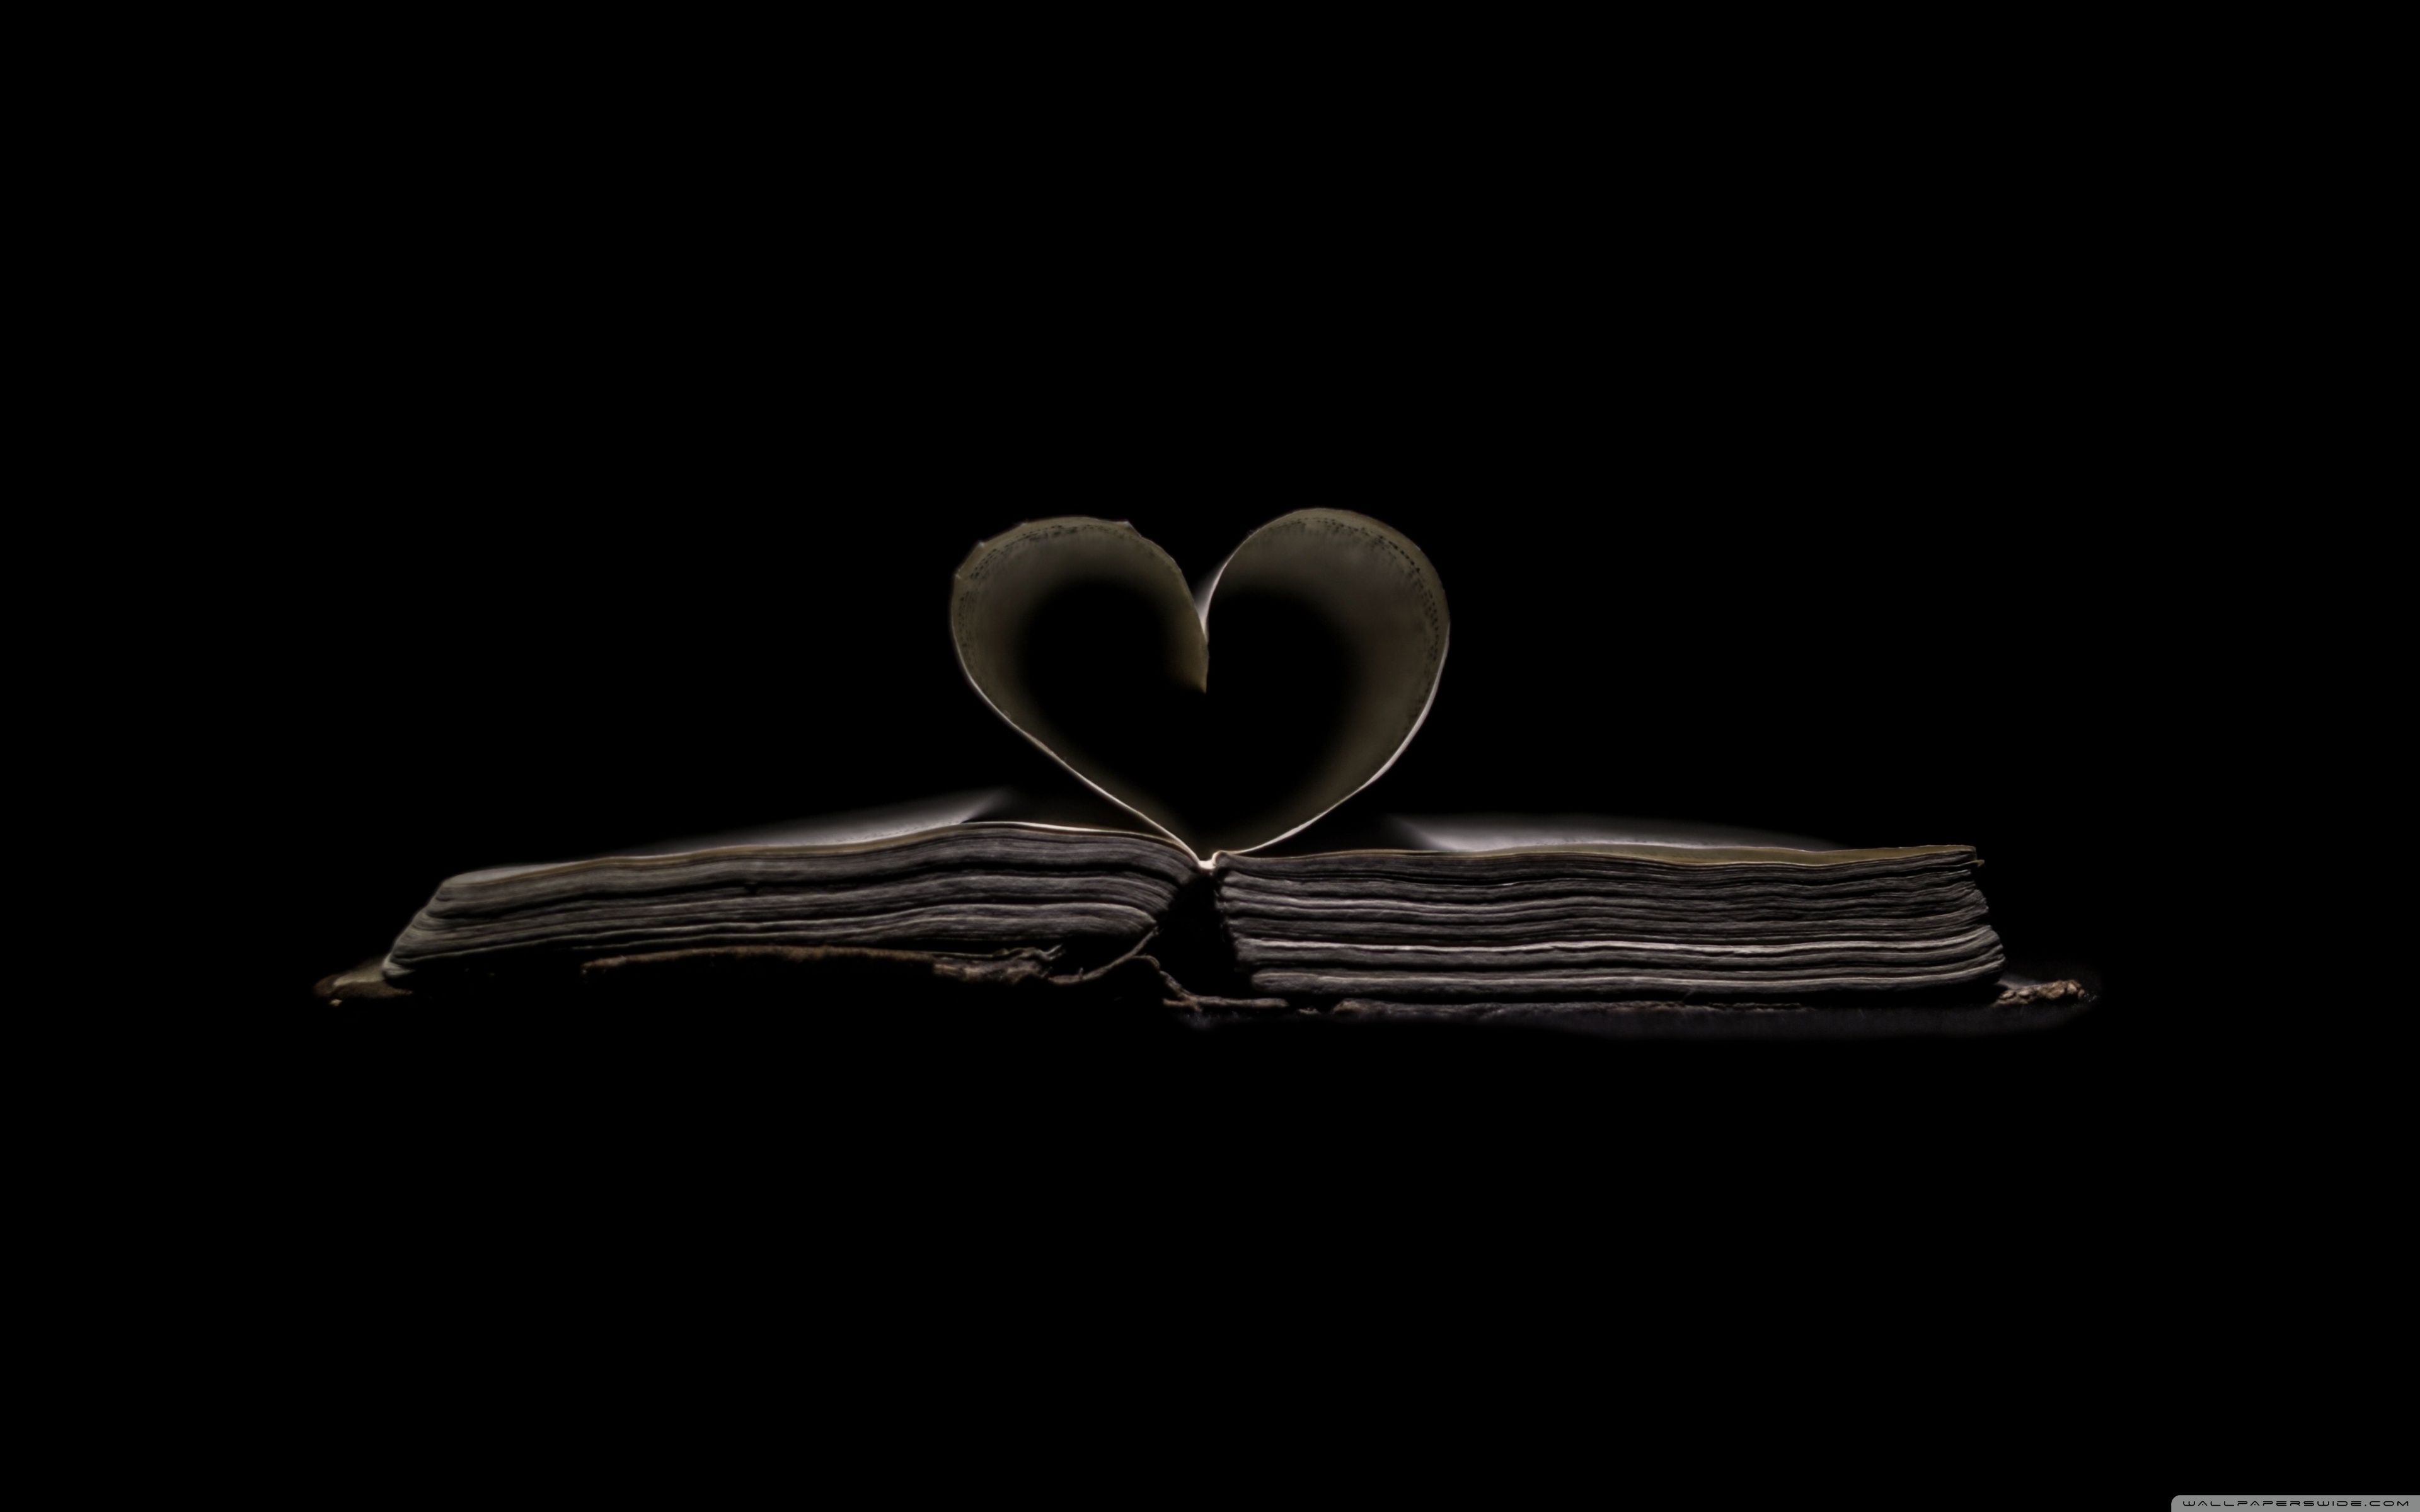 Black And White Heart Book - HD Wallpaper 